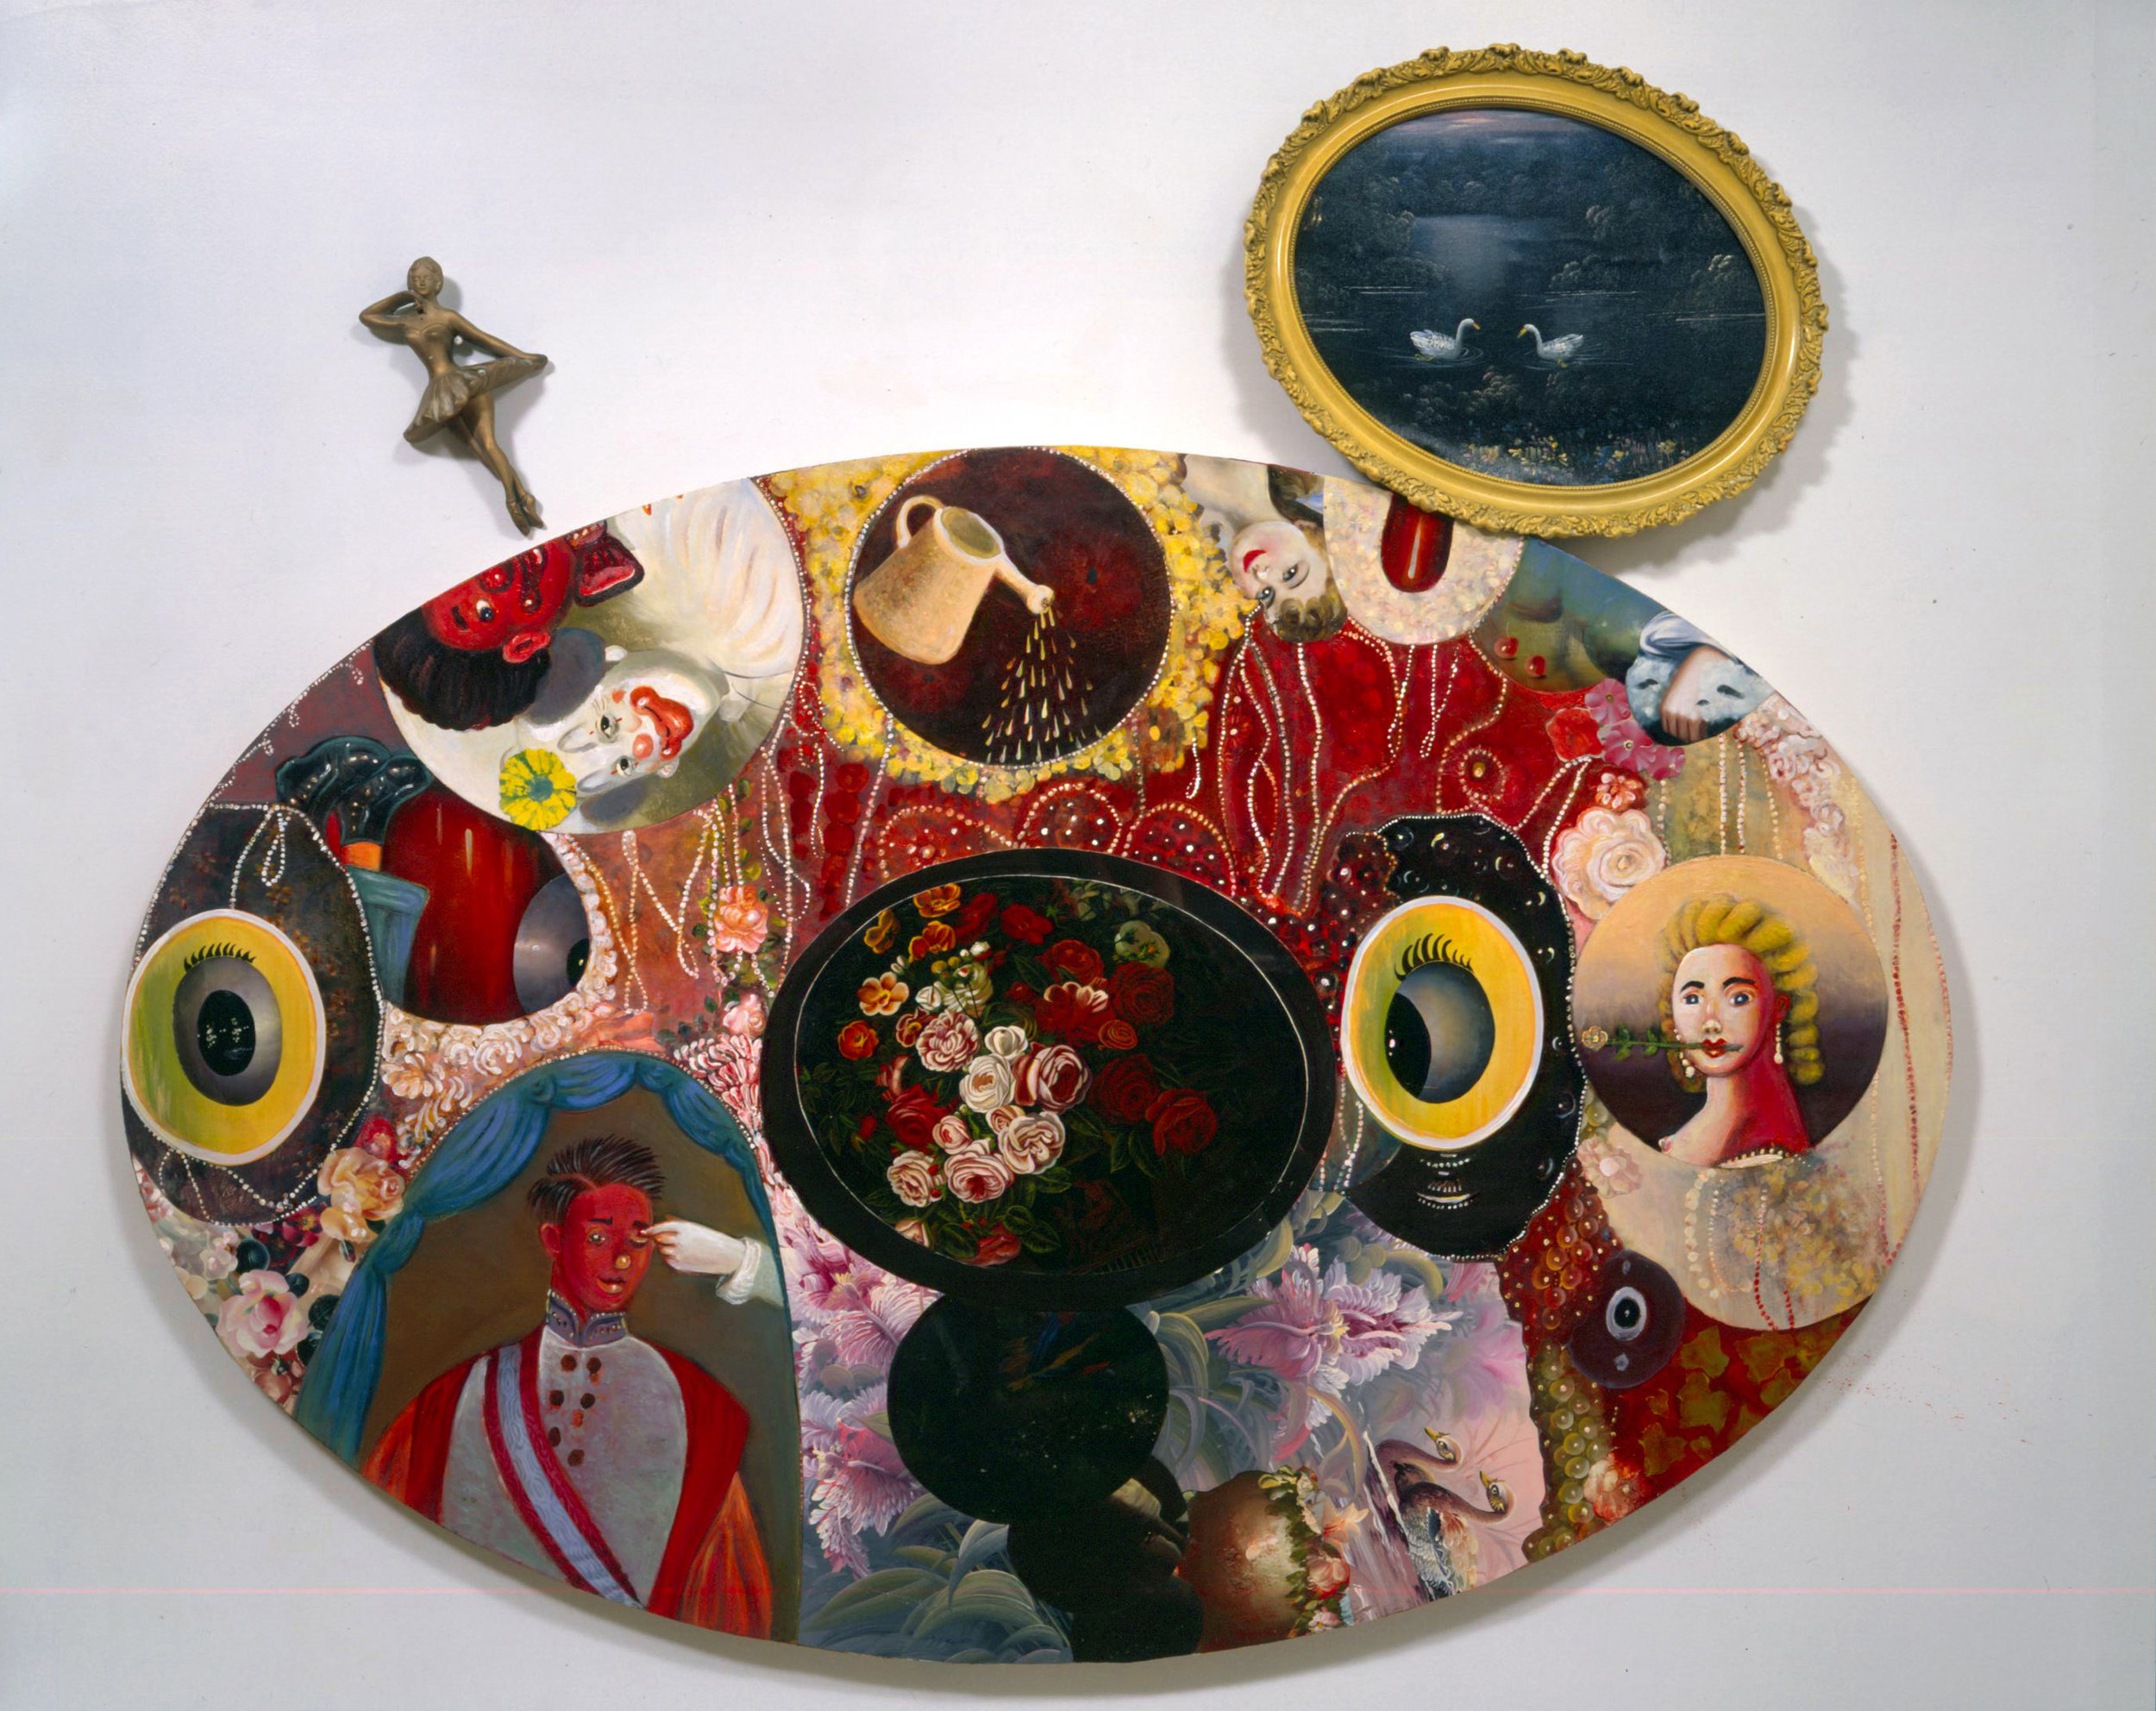 Seduction, 72" × 84", oil and collage on canvas, 1995